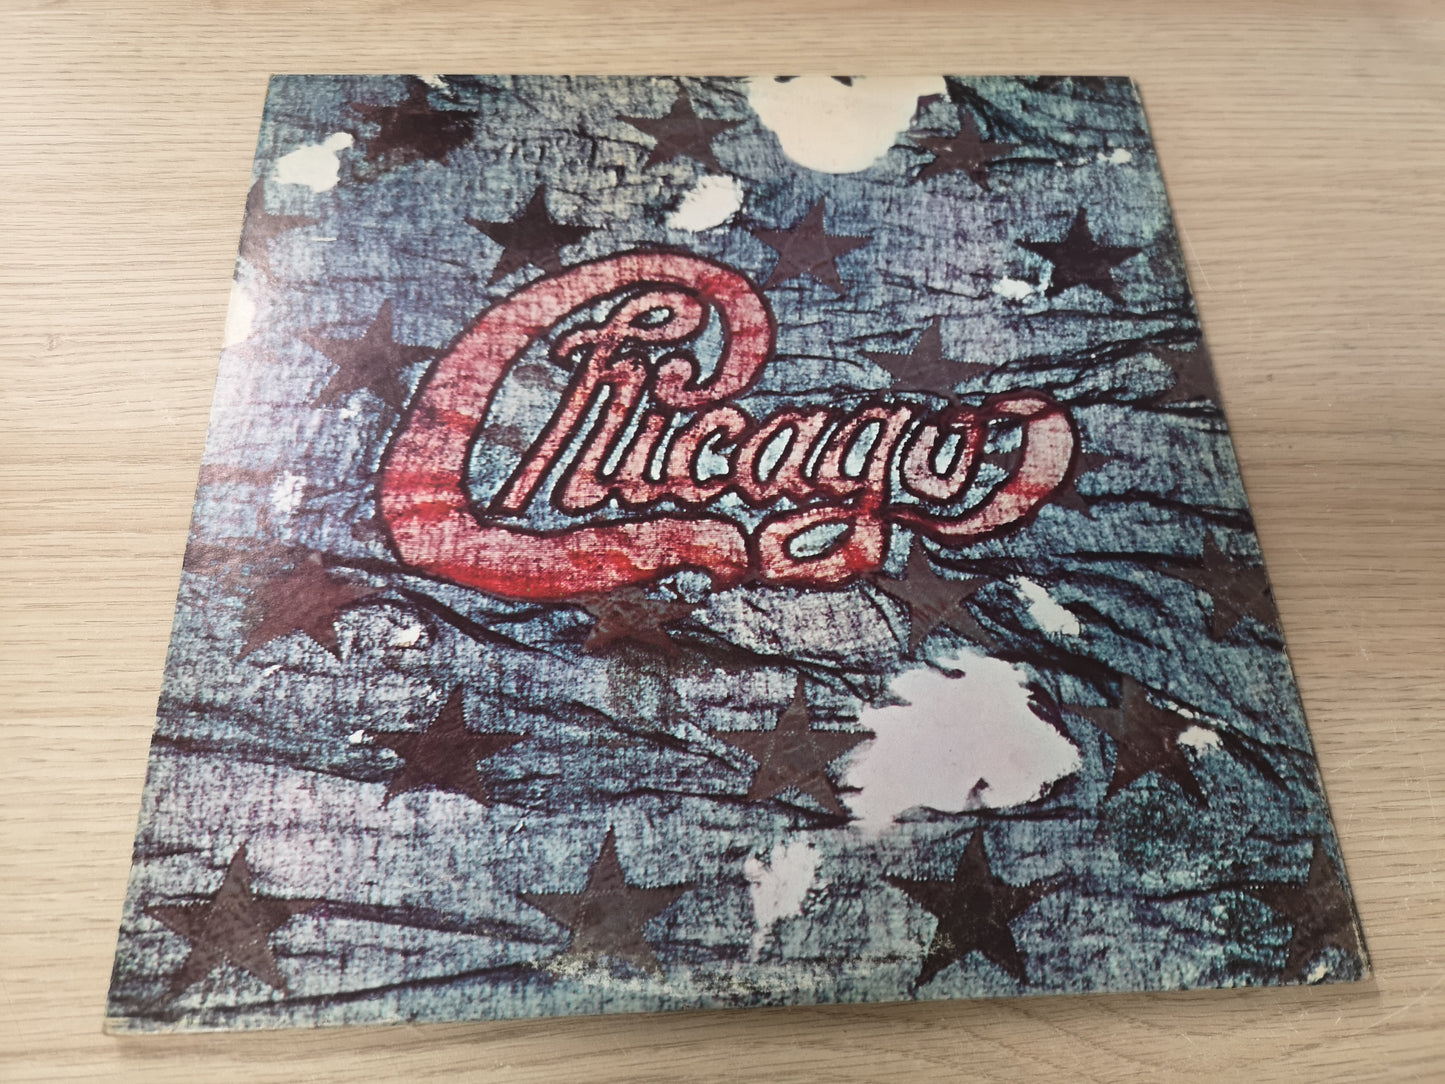 Chicago "III" Orig US 1971 Double Lp w/ Poster M-/M-